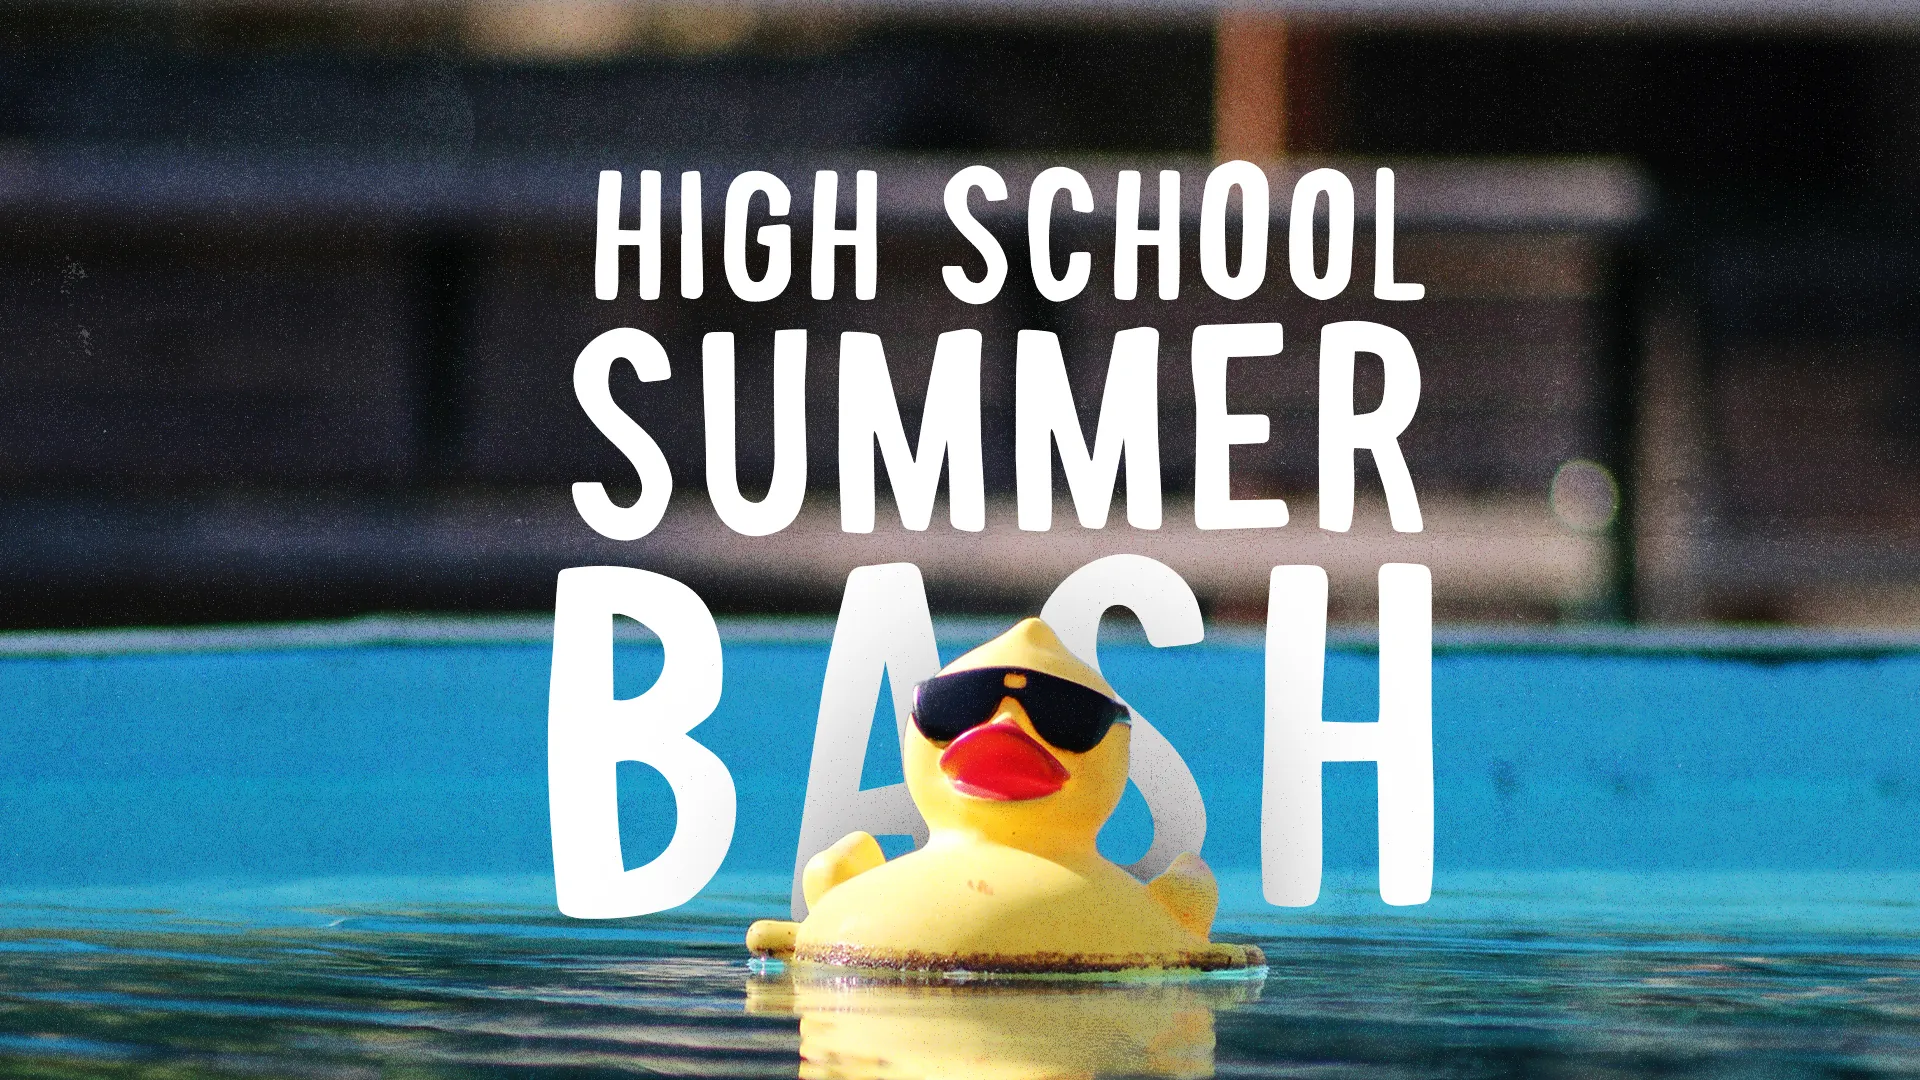 Dive Into Summer With This 'High School Summer Bash' Graphic, Perfect For Inviting Students To A Season Of Fun And Fellowship. Ideal For Church Media Spotlighting Youth Events.